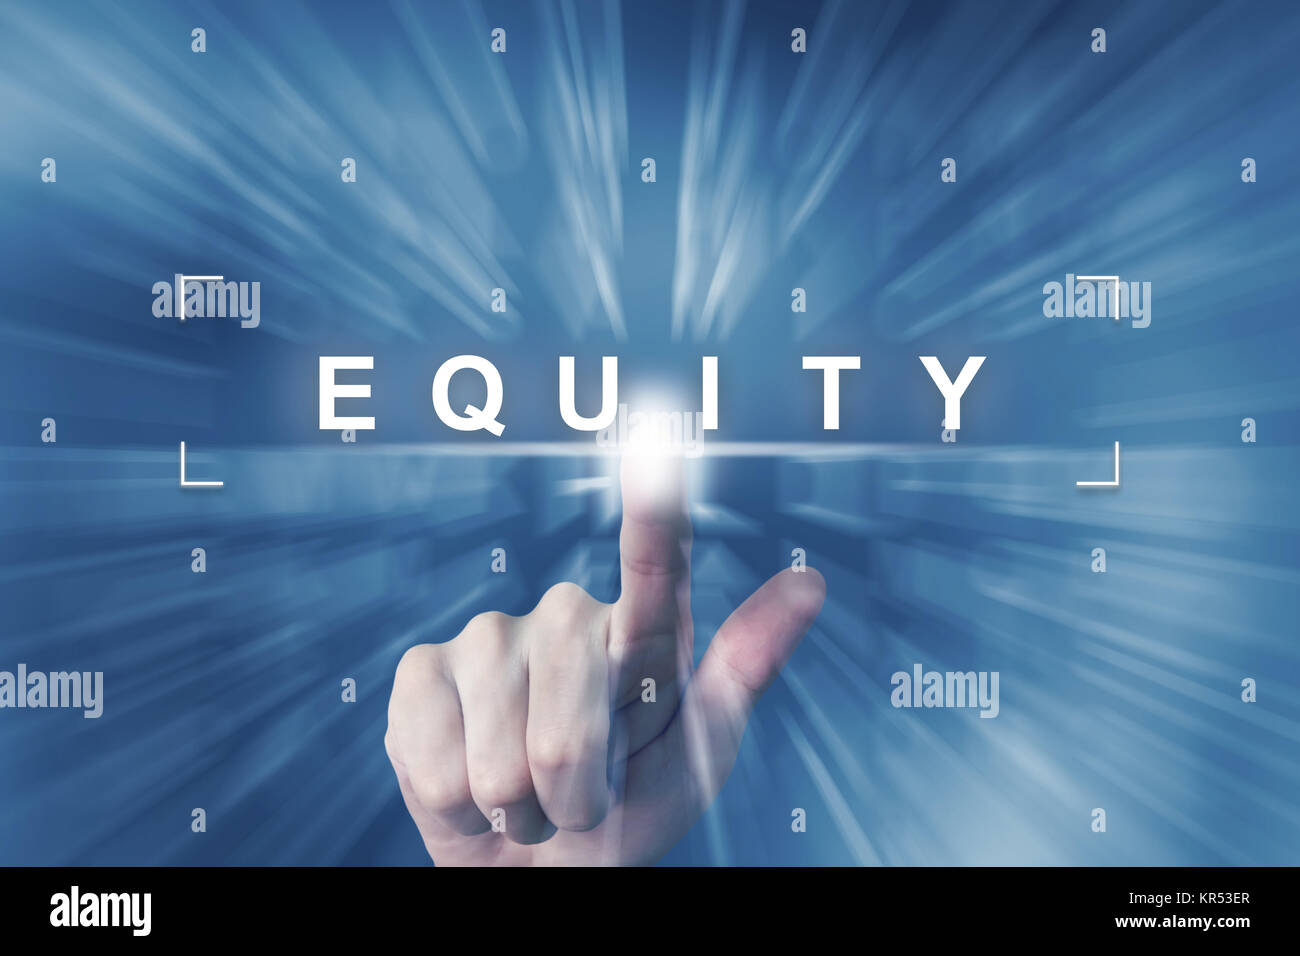 hand clicking on equity button Stock Photo